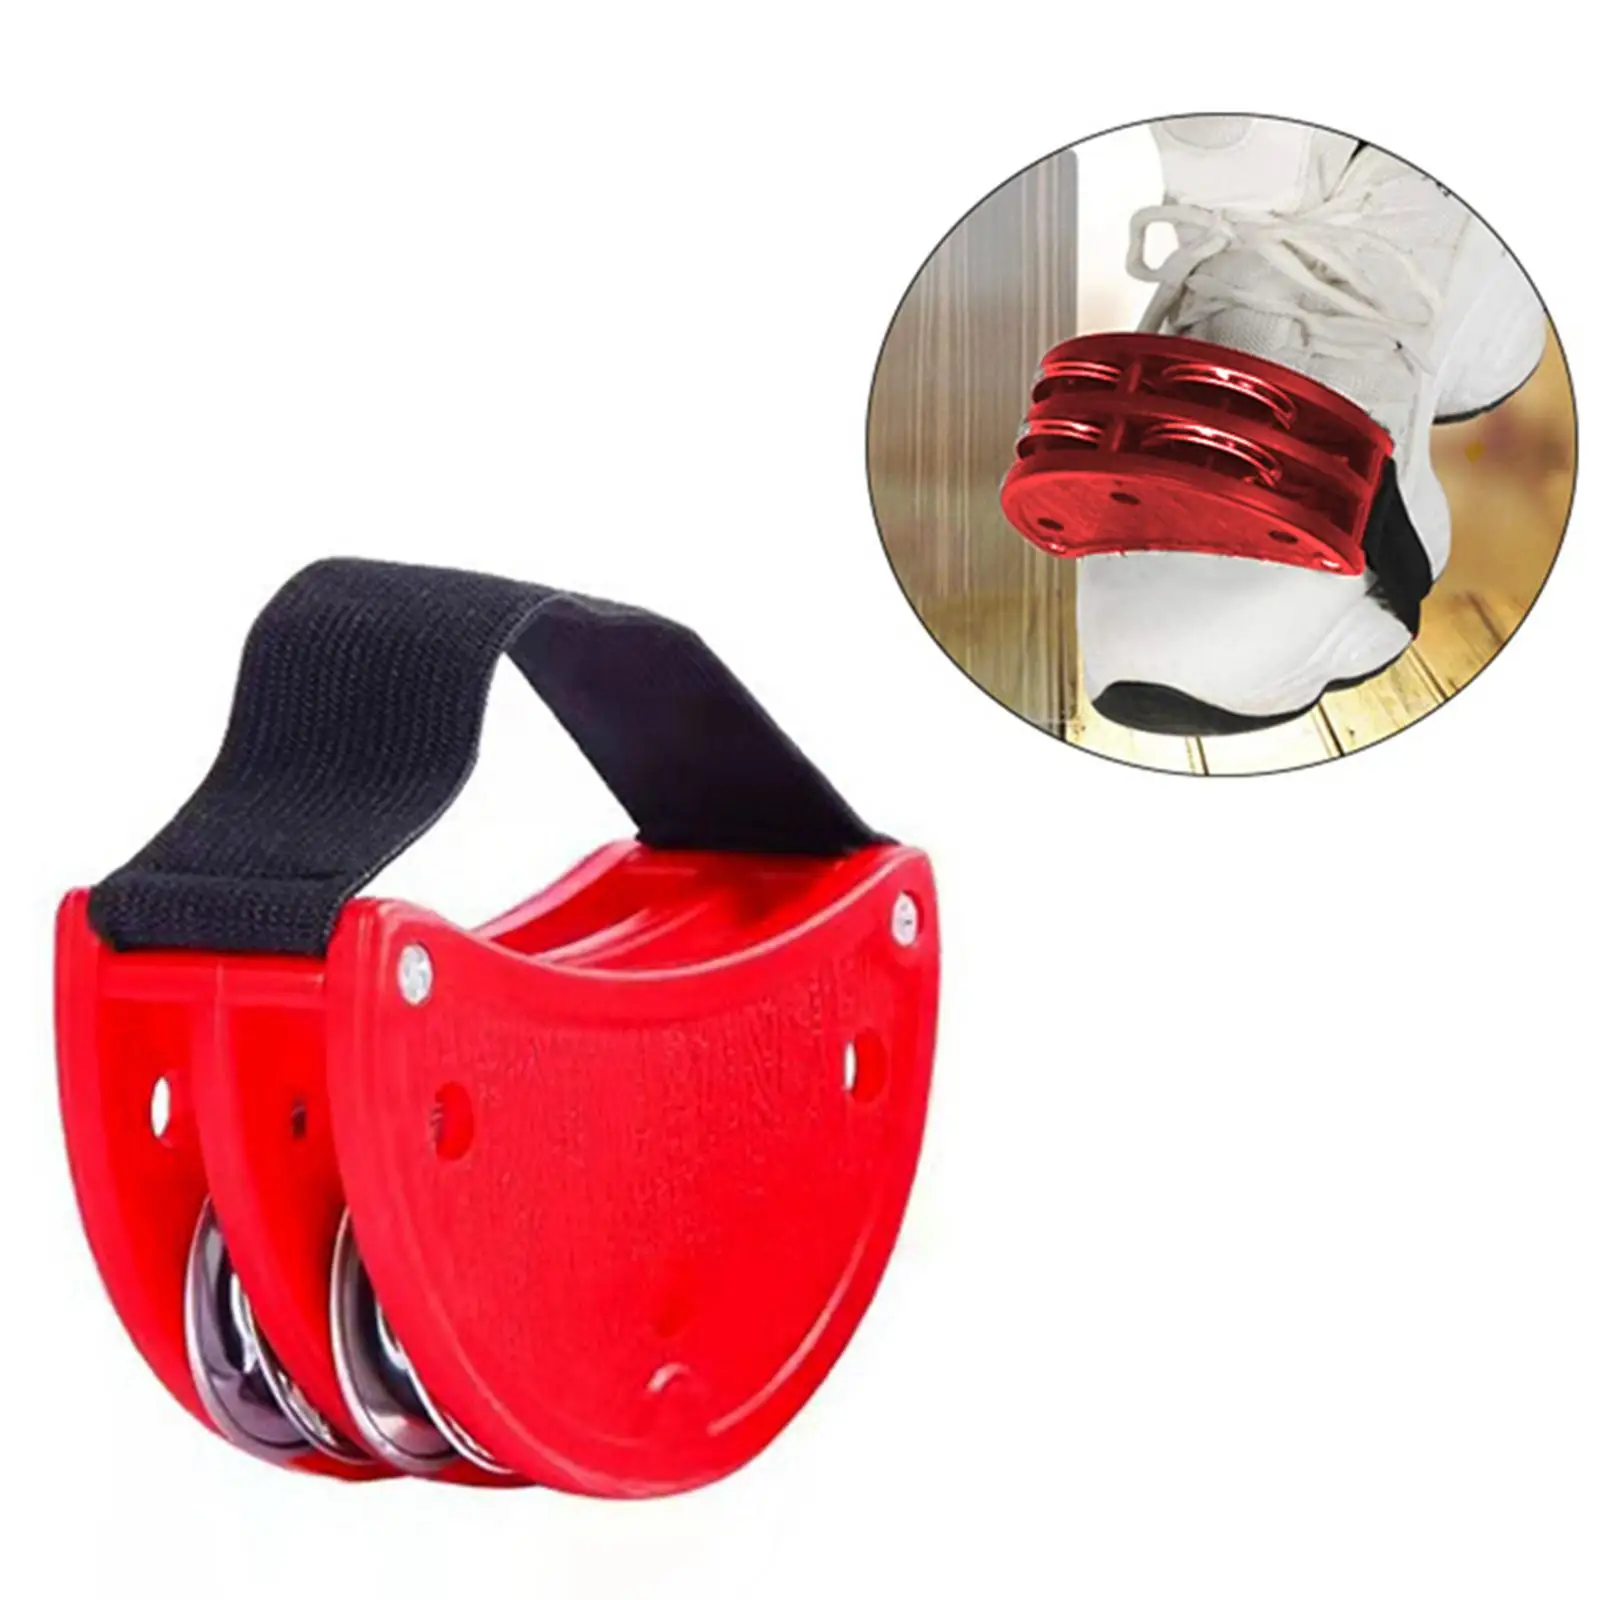 Foot Tambourine Guitar Drum Accessory Instrument for Adults and Kids KTV